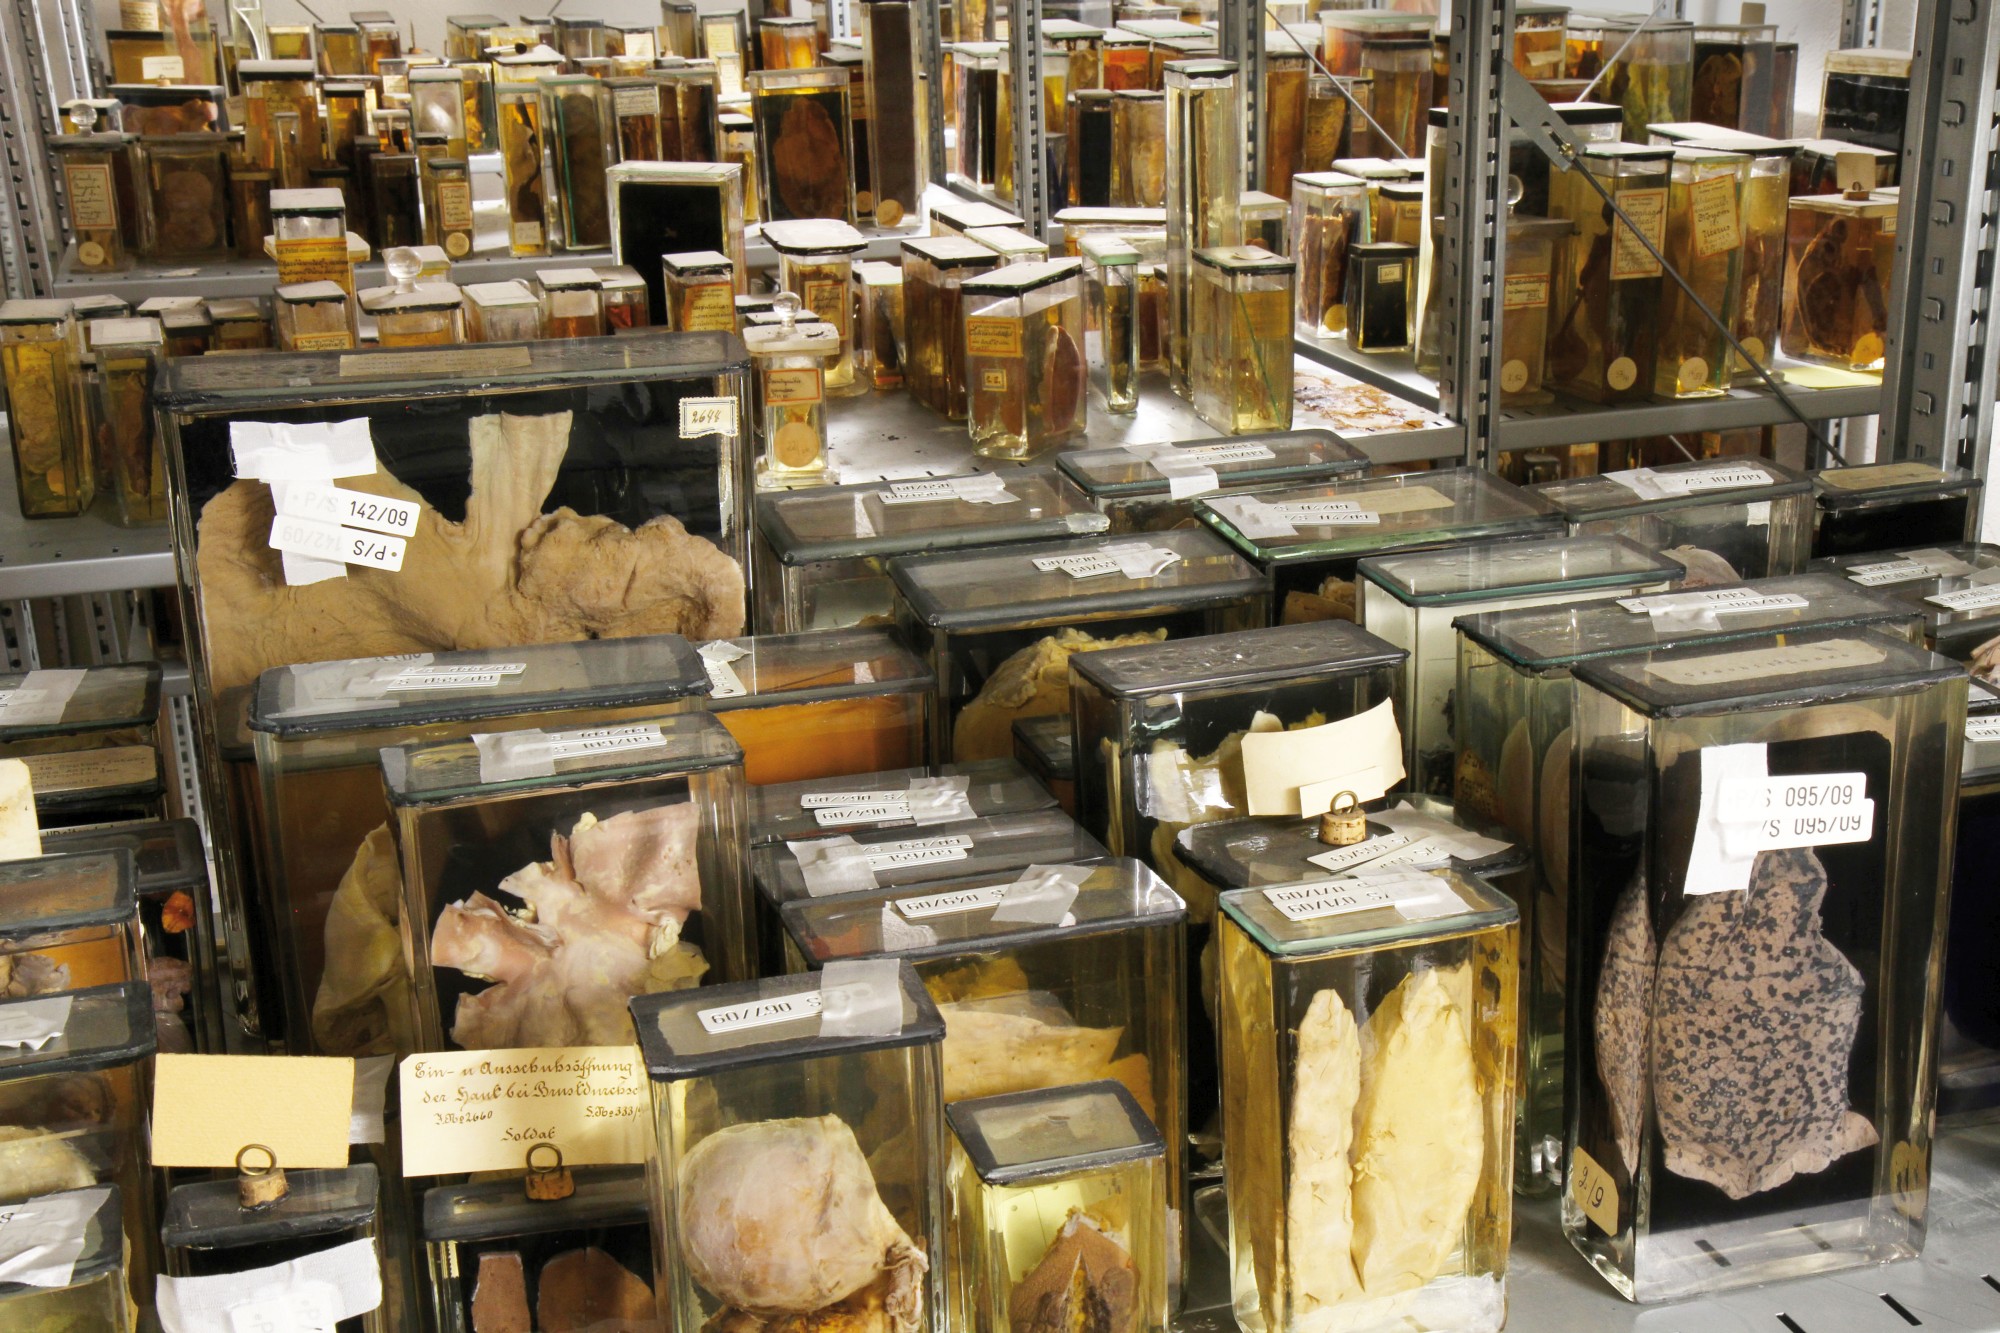 In the foreground is a row of preparations that have been restored along with preparations that have recently been logged in the inventory. (Image: Georg Pöhlein)